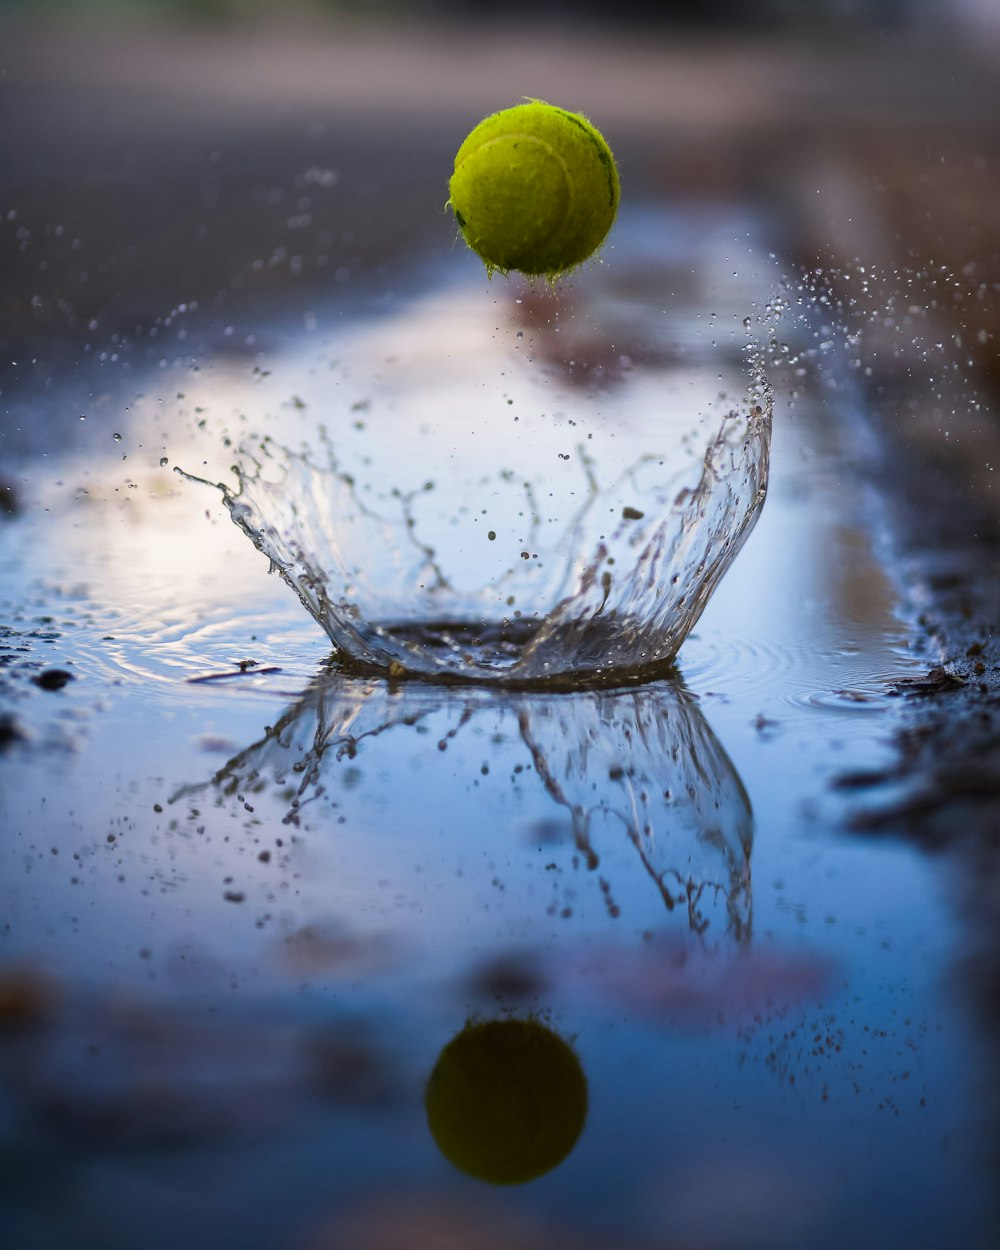 green tennis ball bouncing on water photo – Free Blue Image on Unsplash